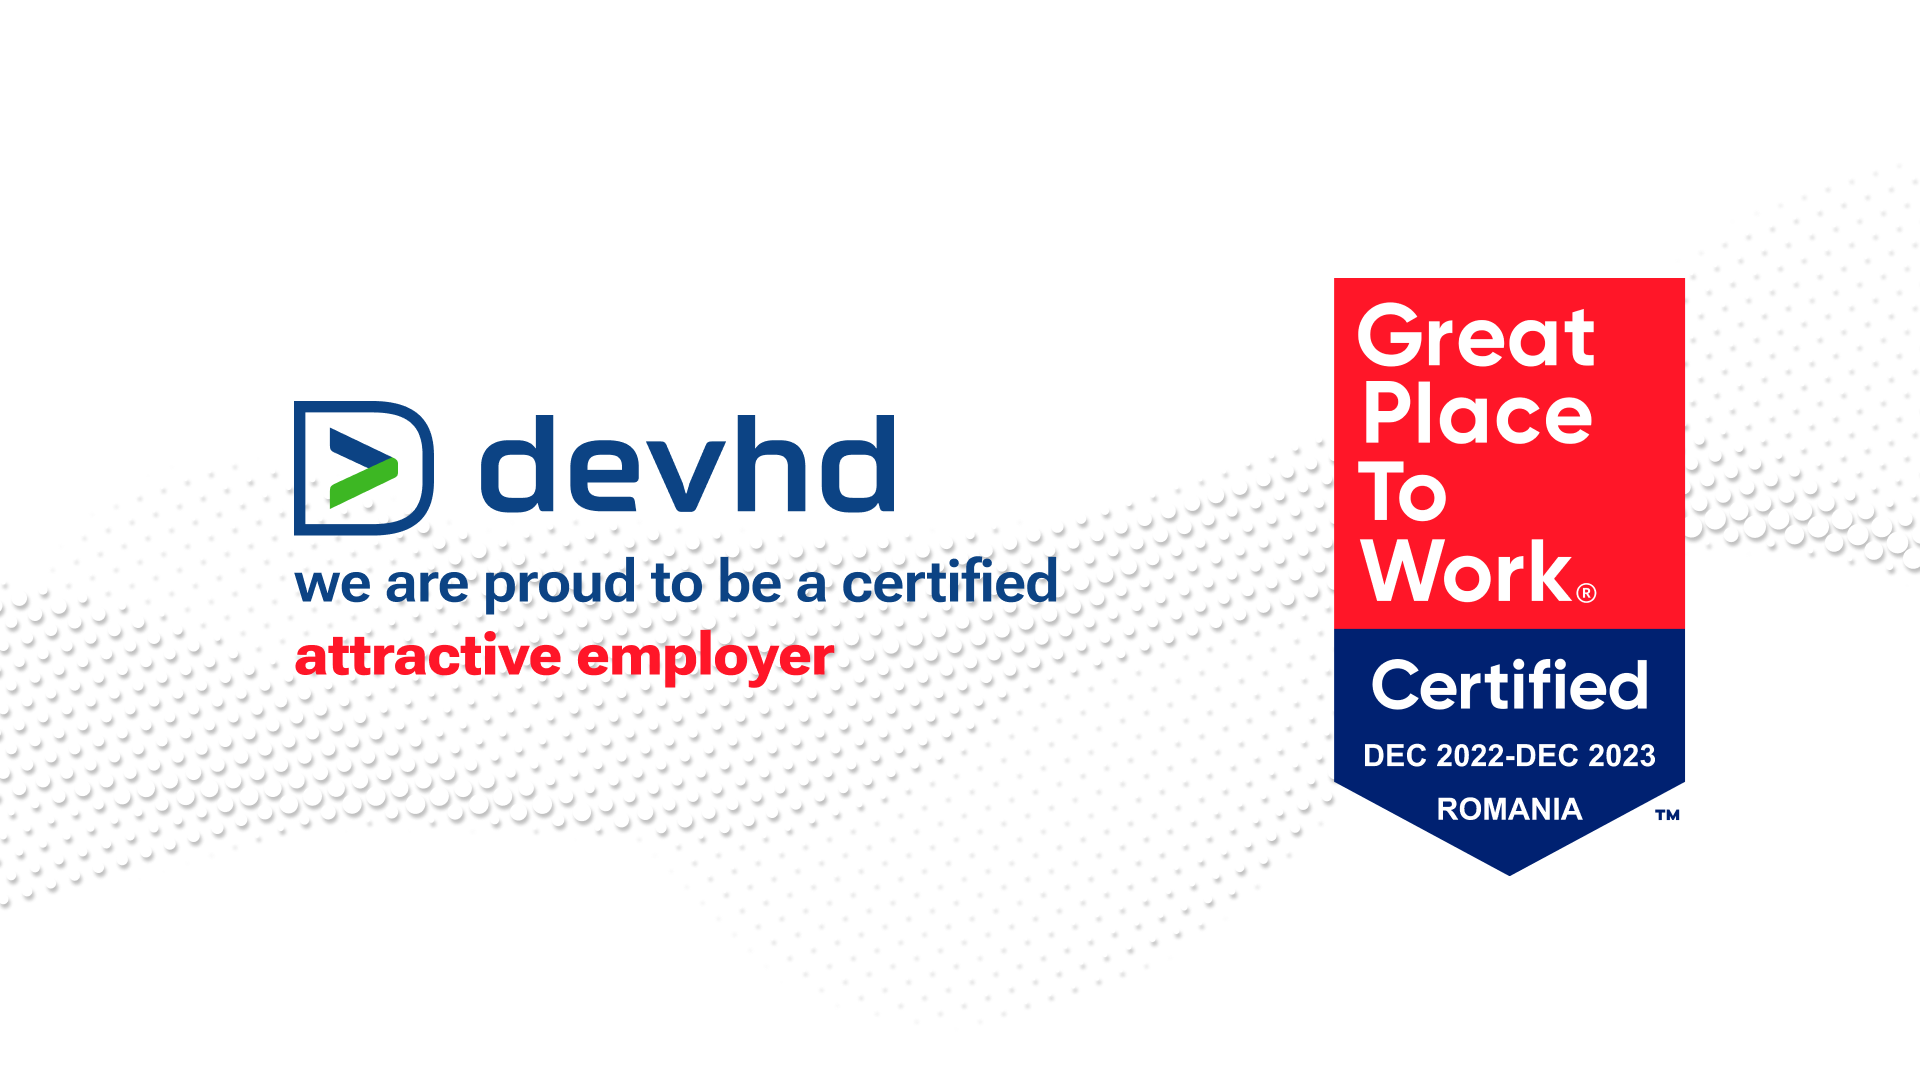 Devhd is Great Place to Work® Certified: Our Commitment to Employee Satisfaction and Growth